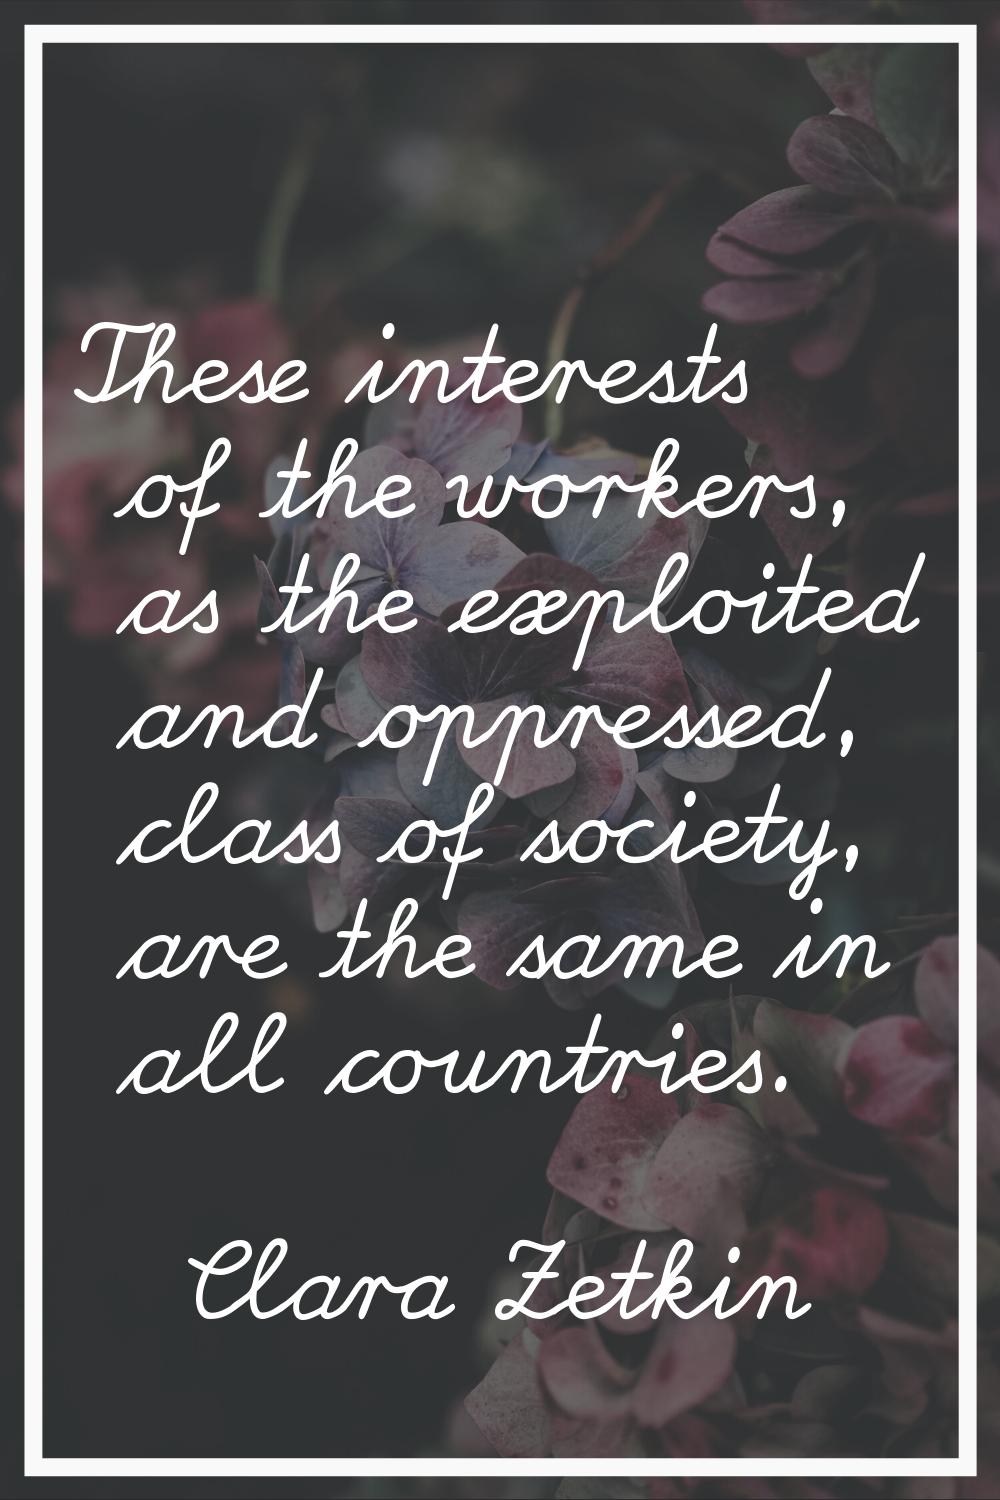 These interests of the workers, as the exploited and oppressed, class of society, are the same in a